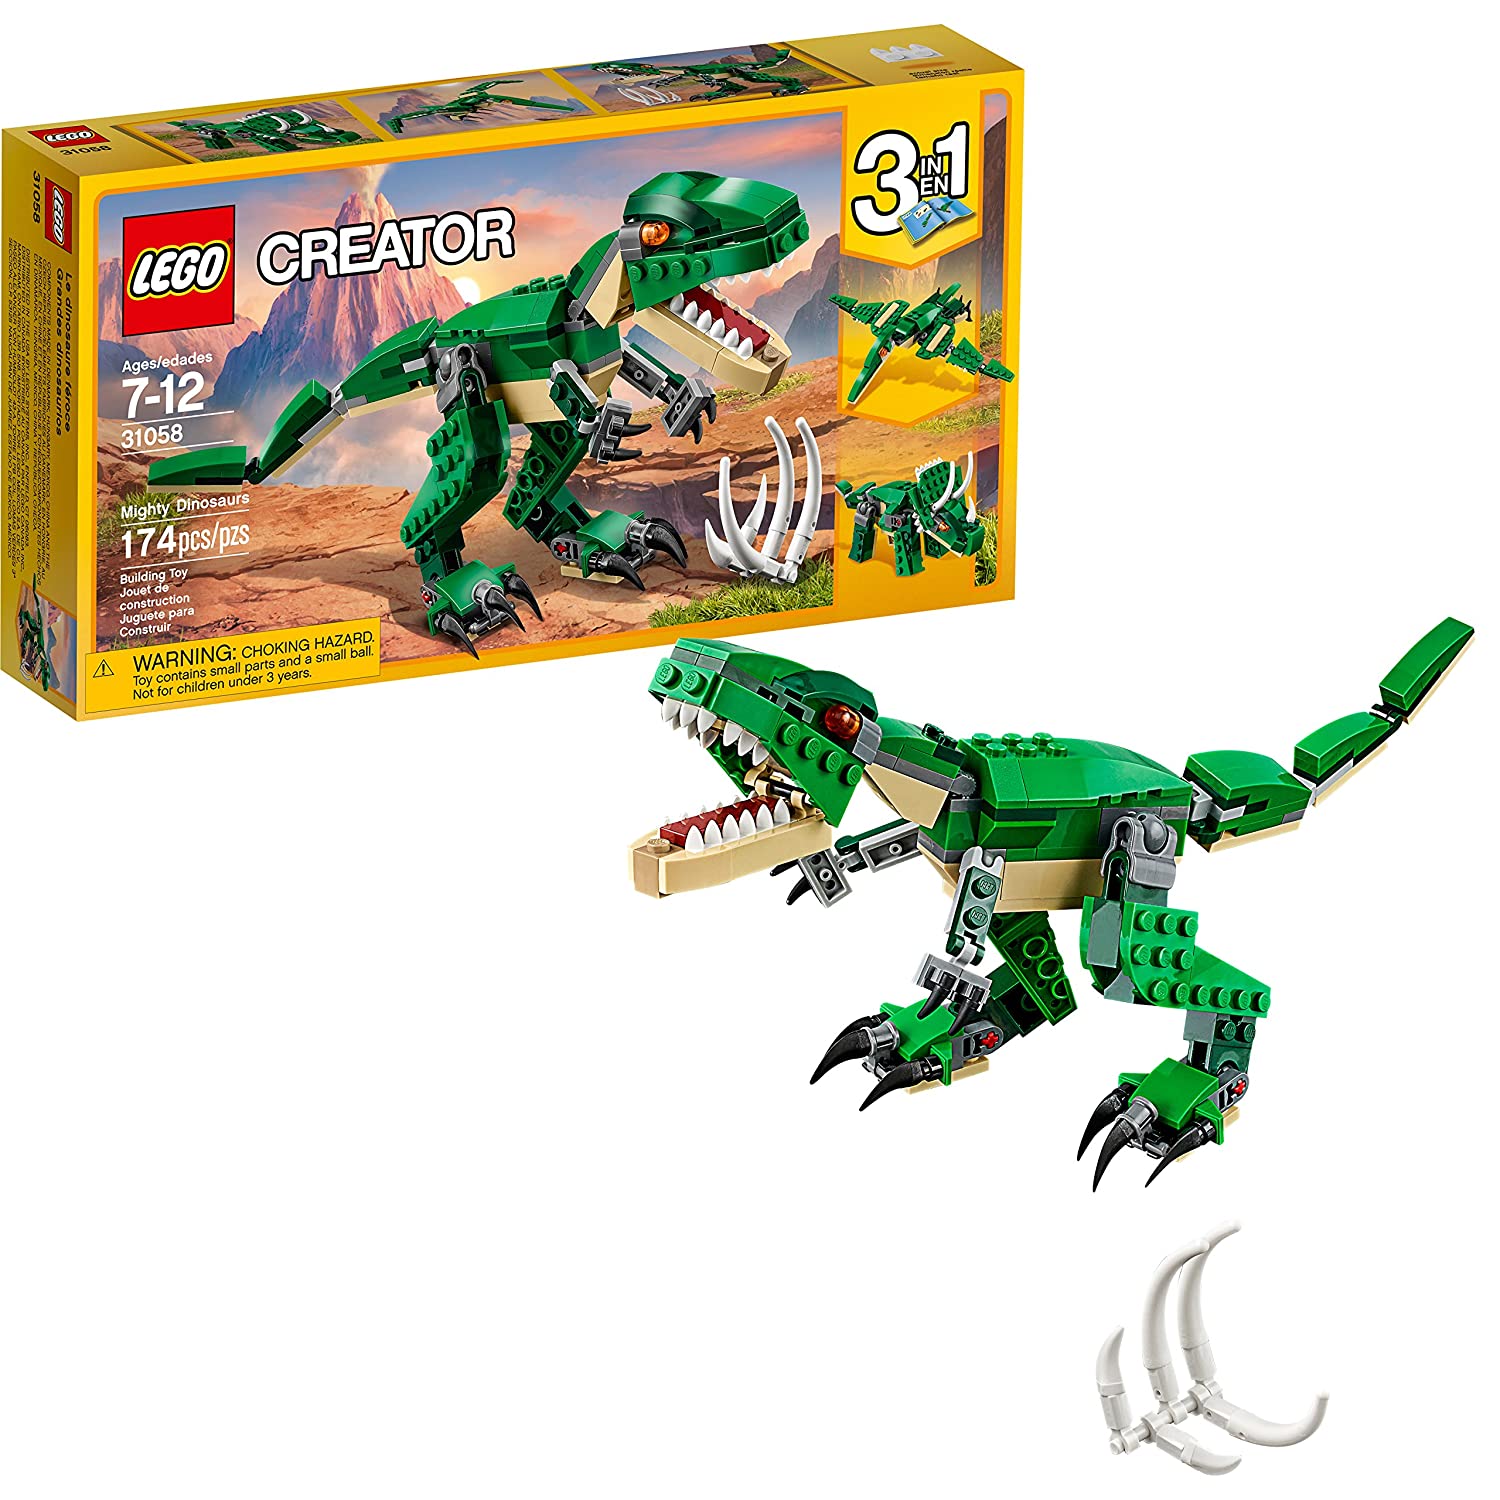 Top 8 Best Lego Dinosaurs Set Reviews in 2022 1